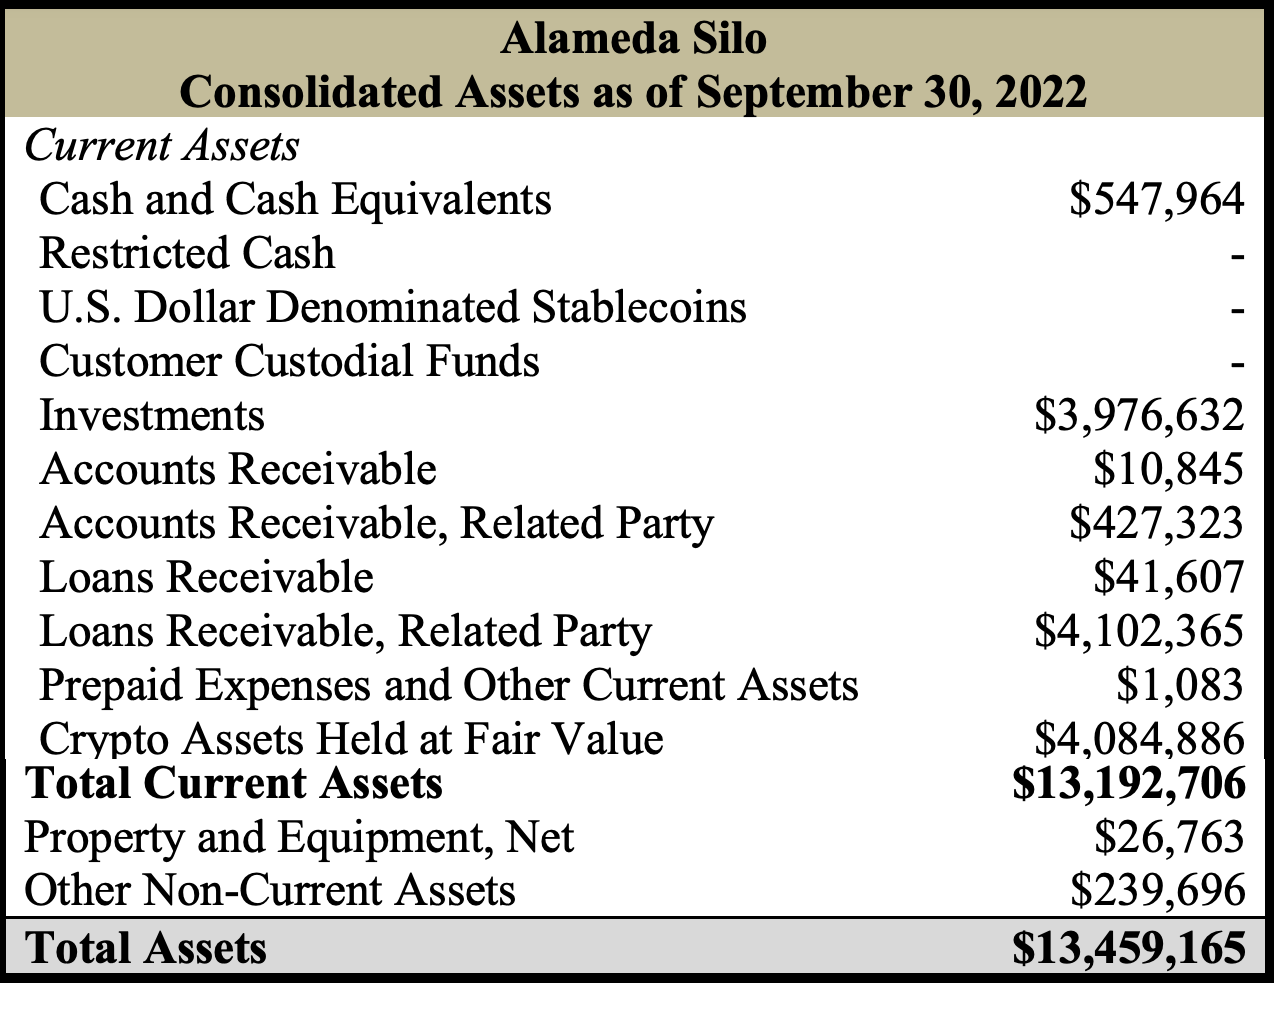 Alameda Silo - Total Assets as of Sep 30, 2022